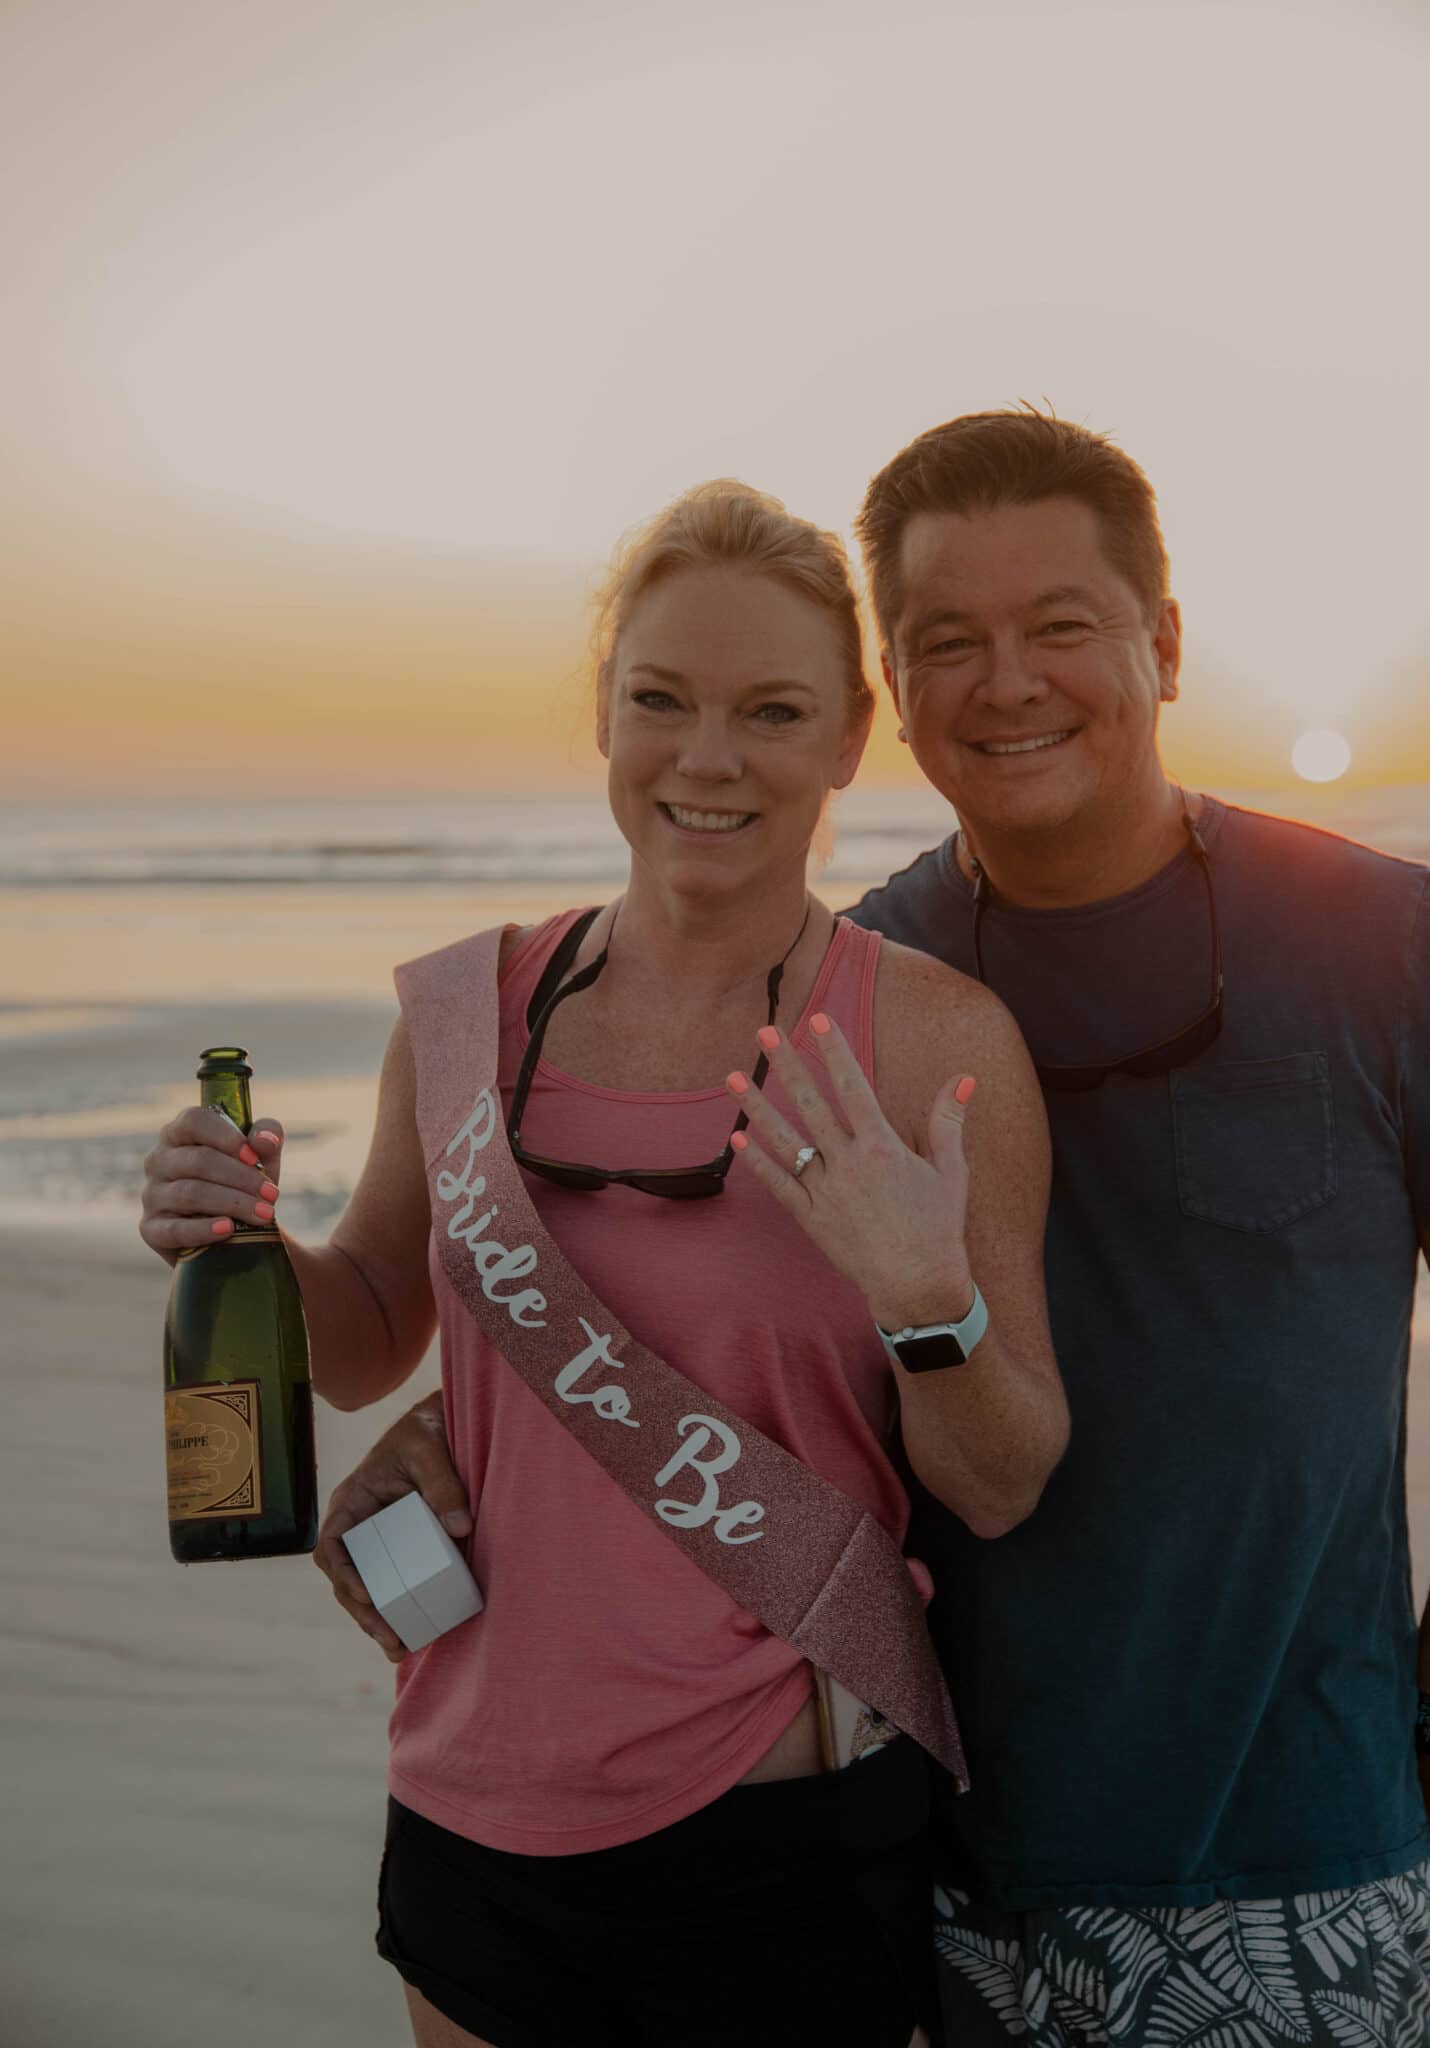 Couple celebrating marriage proposal on sunrise beach with champagne